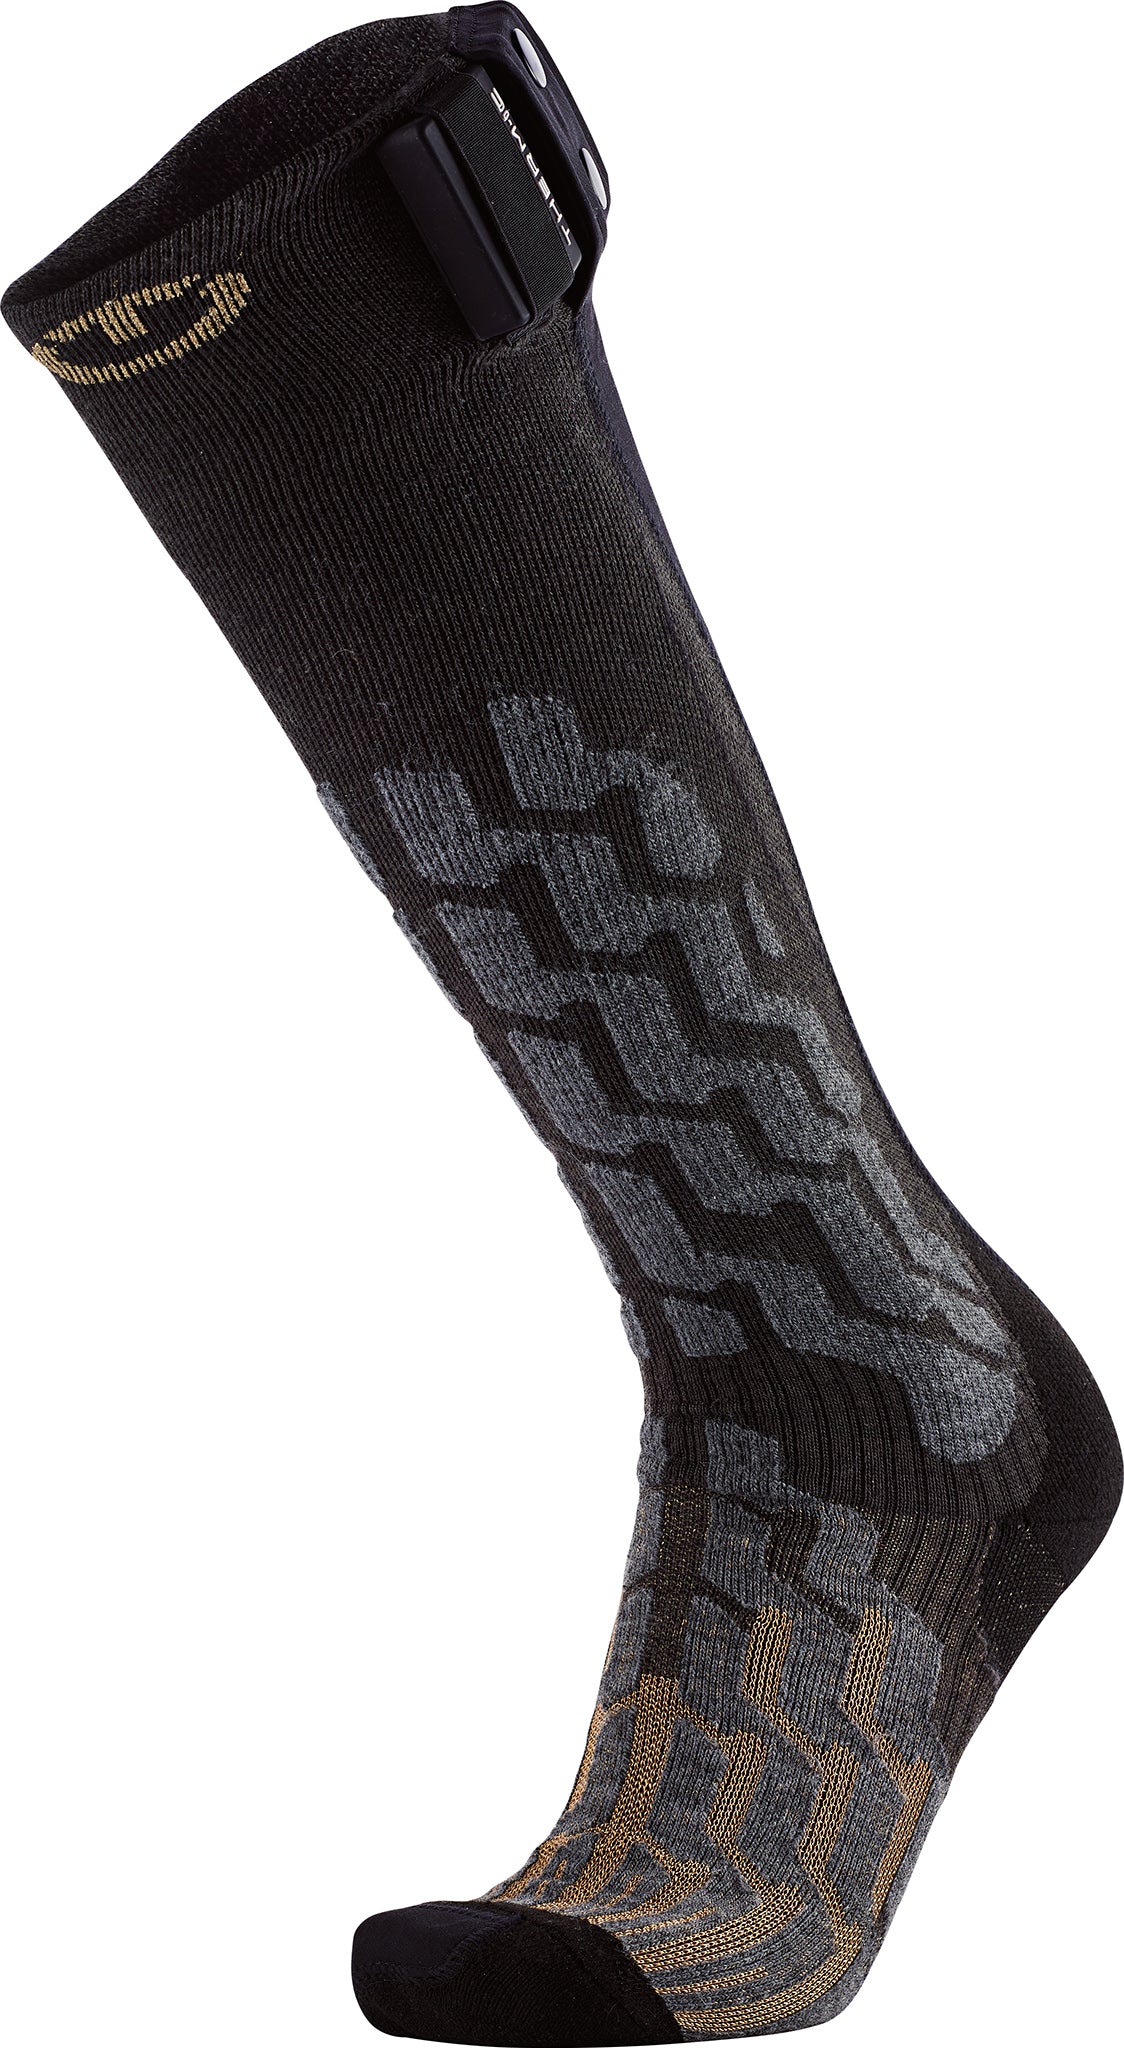 Chaussettes Therm-ic Ski Warm femme